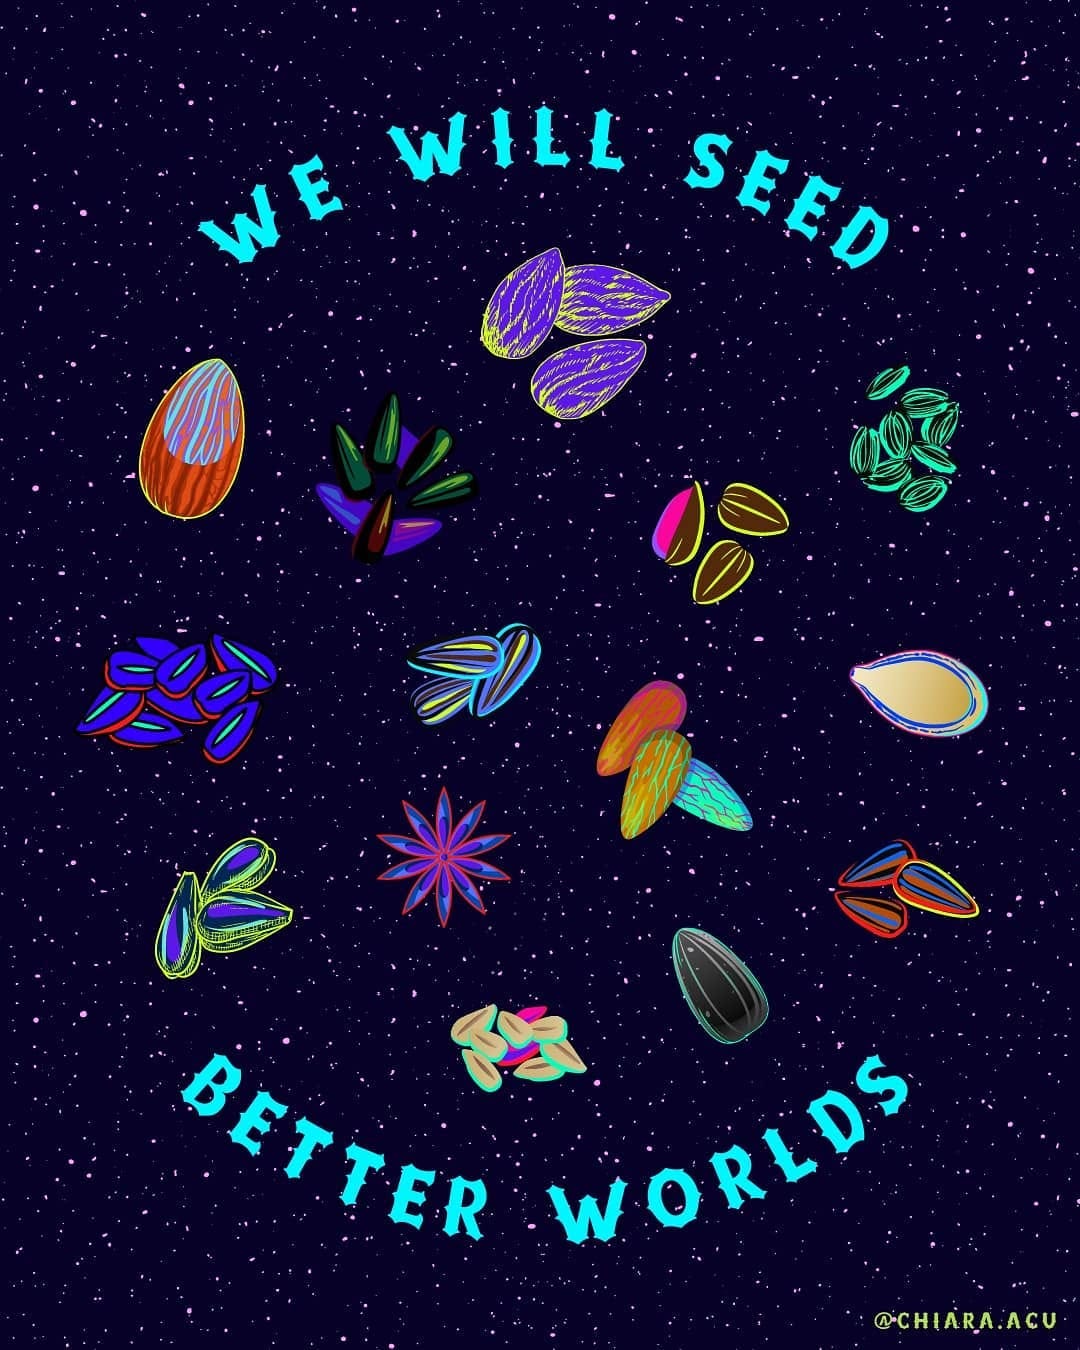 Drawings of neon colored plant seeds float against a starry background, surrounded by the words "We will seed better worlds"